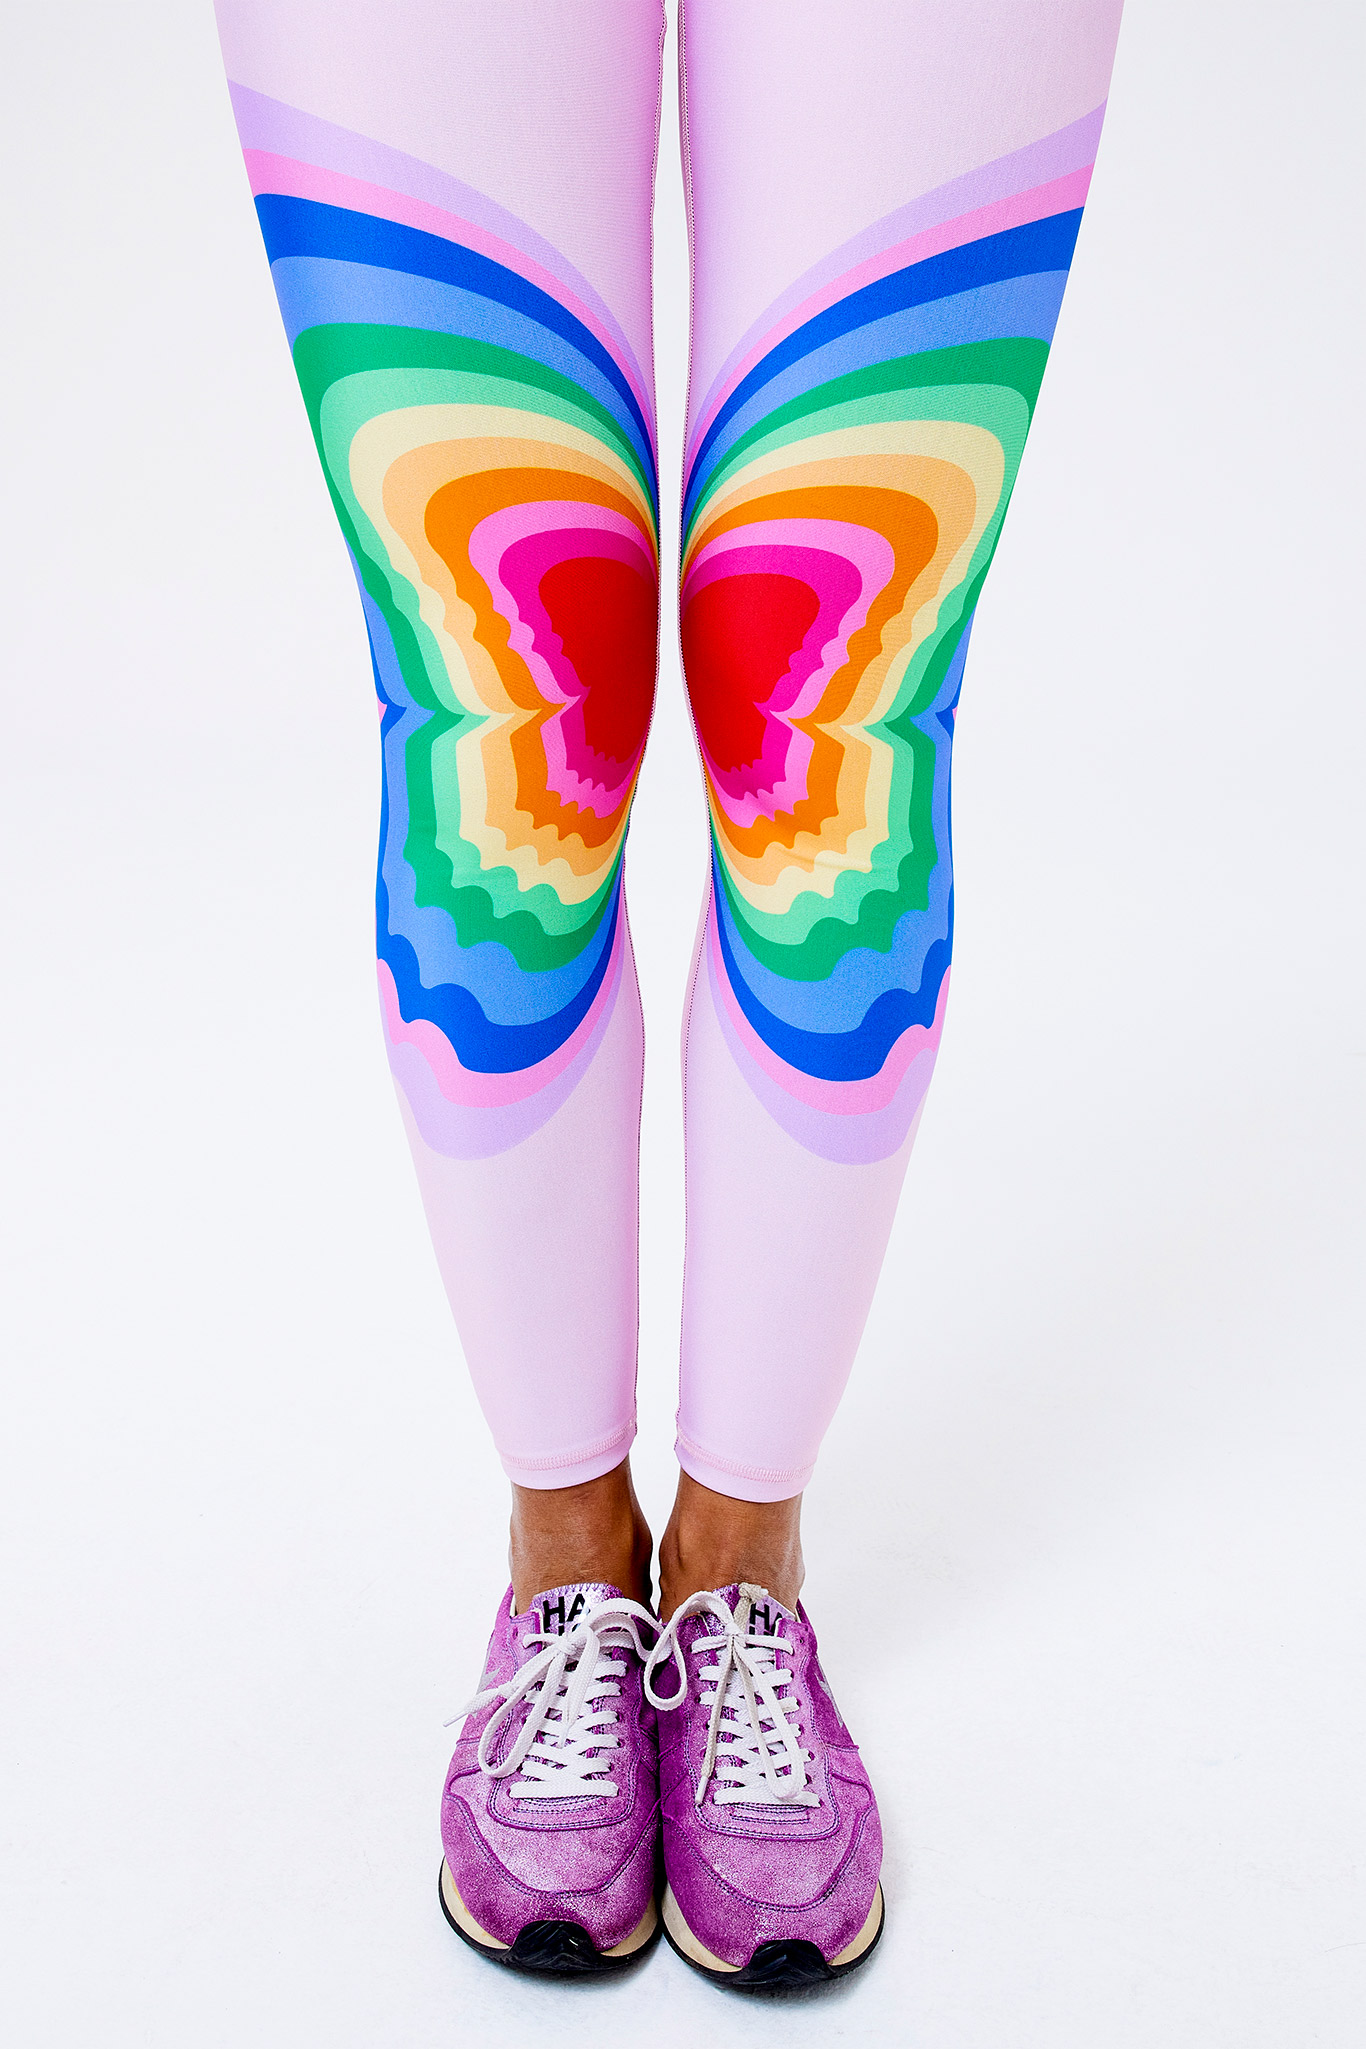 Free People endurance printed leggings - psychedelic butterfly